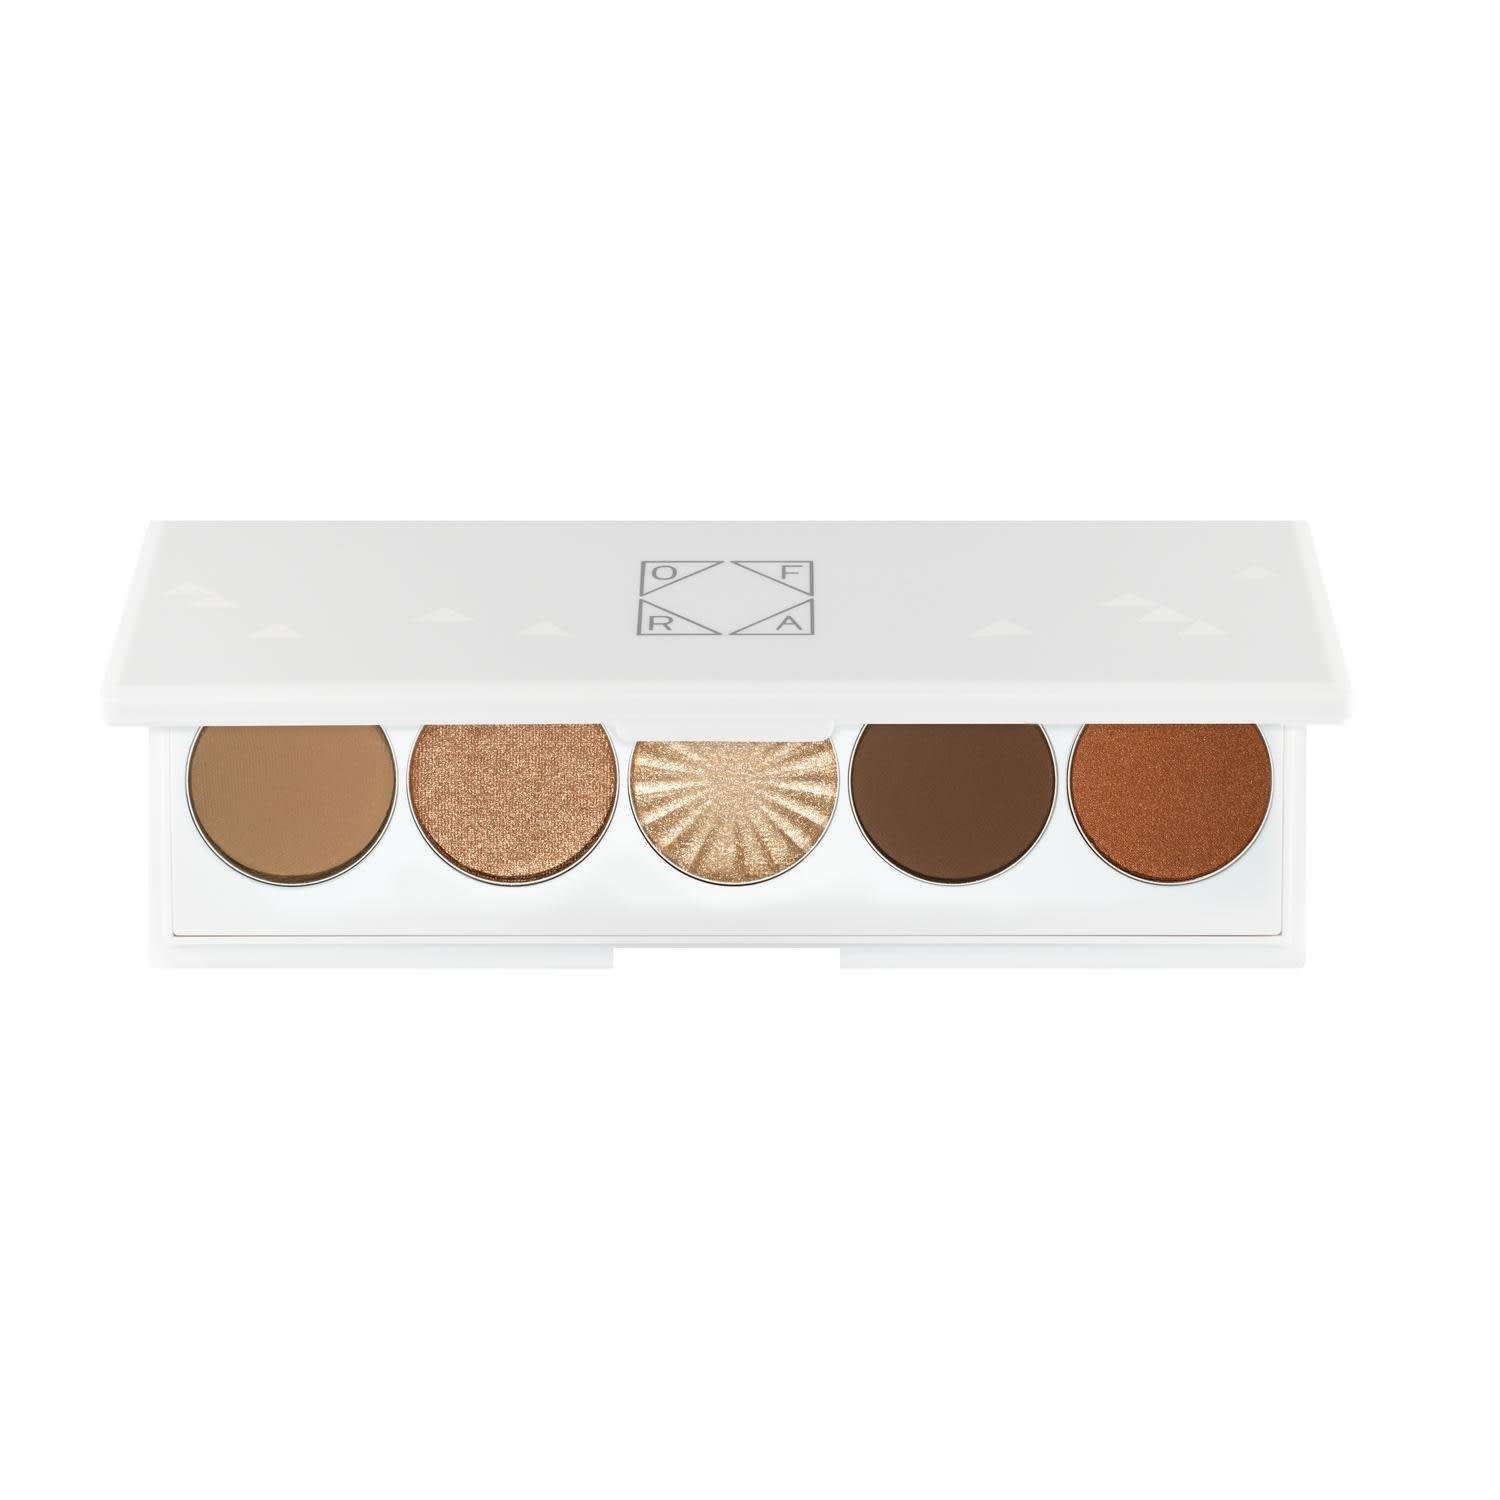 Luxe Signature Palette från OFRA Cosmetics